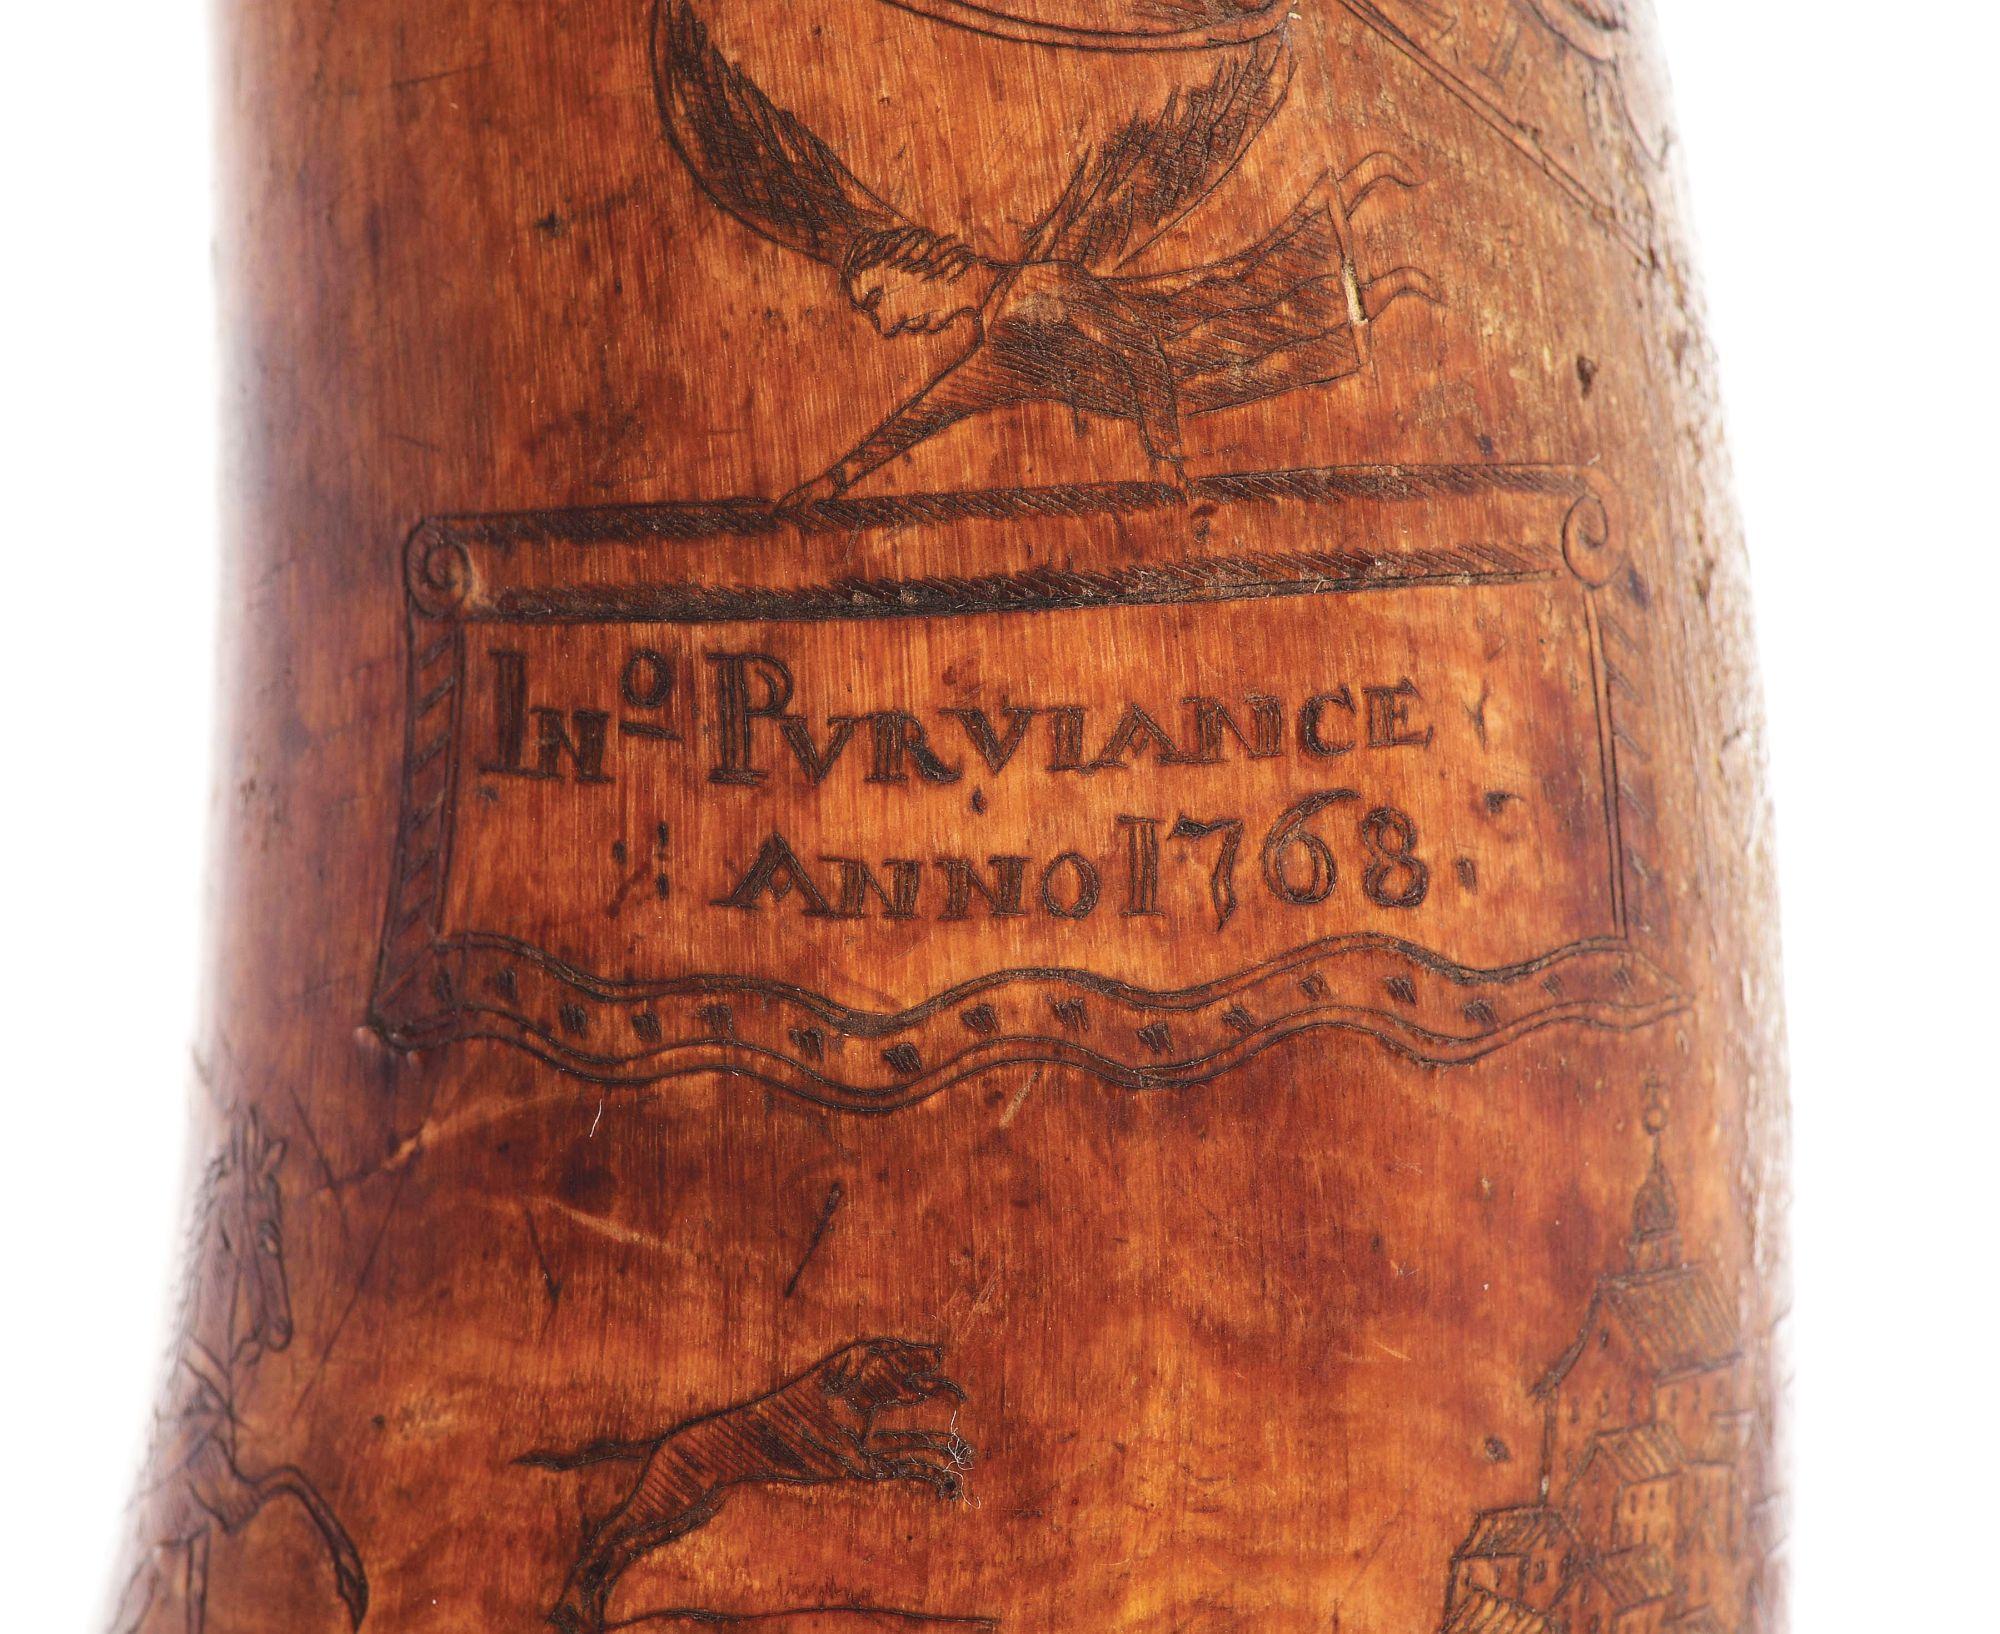 ENGRAVED PHILADELPHIA MAP POWDER HORN OF JOHN PURVIANCE, DATED 1768, ATTRIBUTED TO THE POINTED TREE